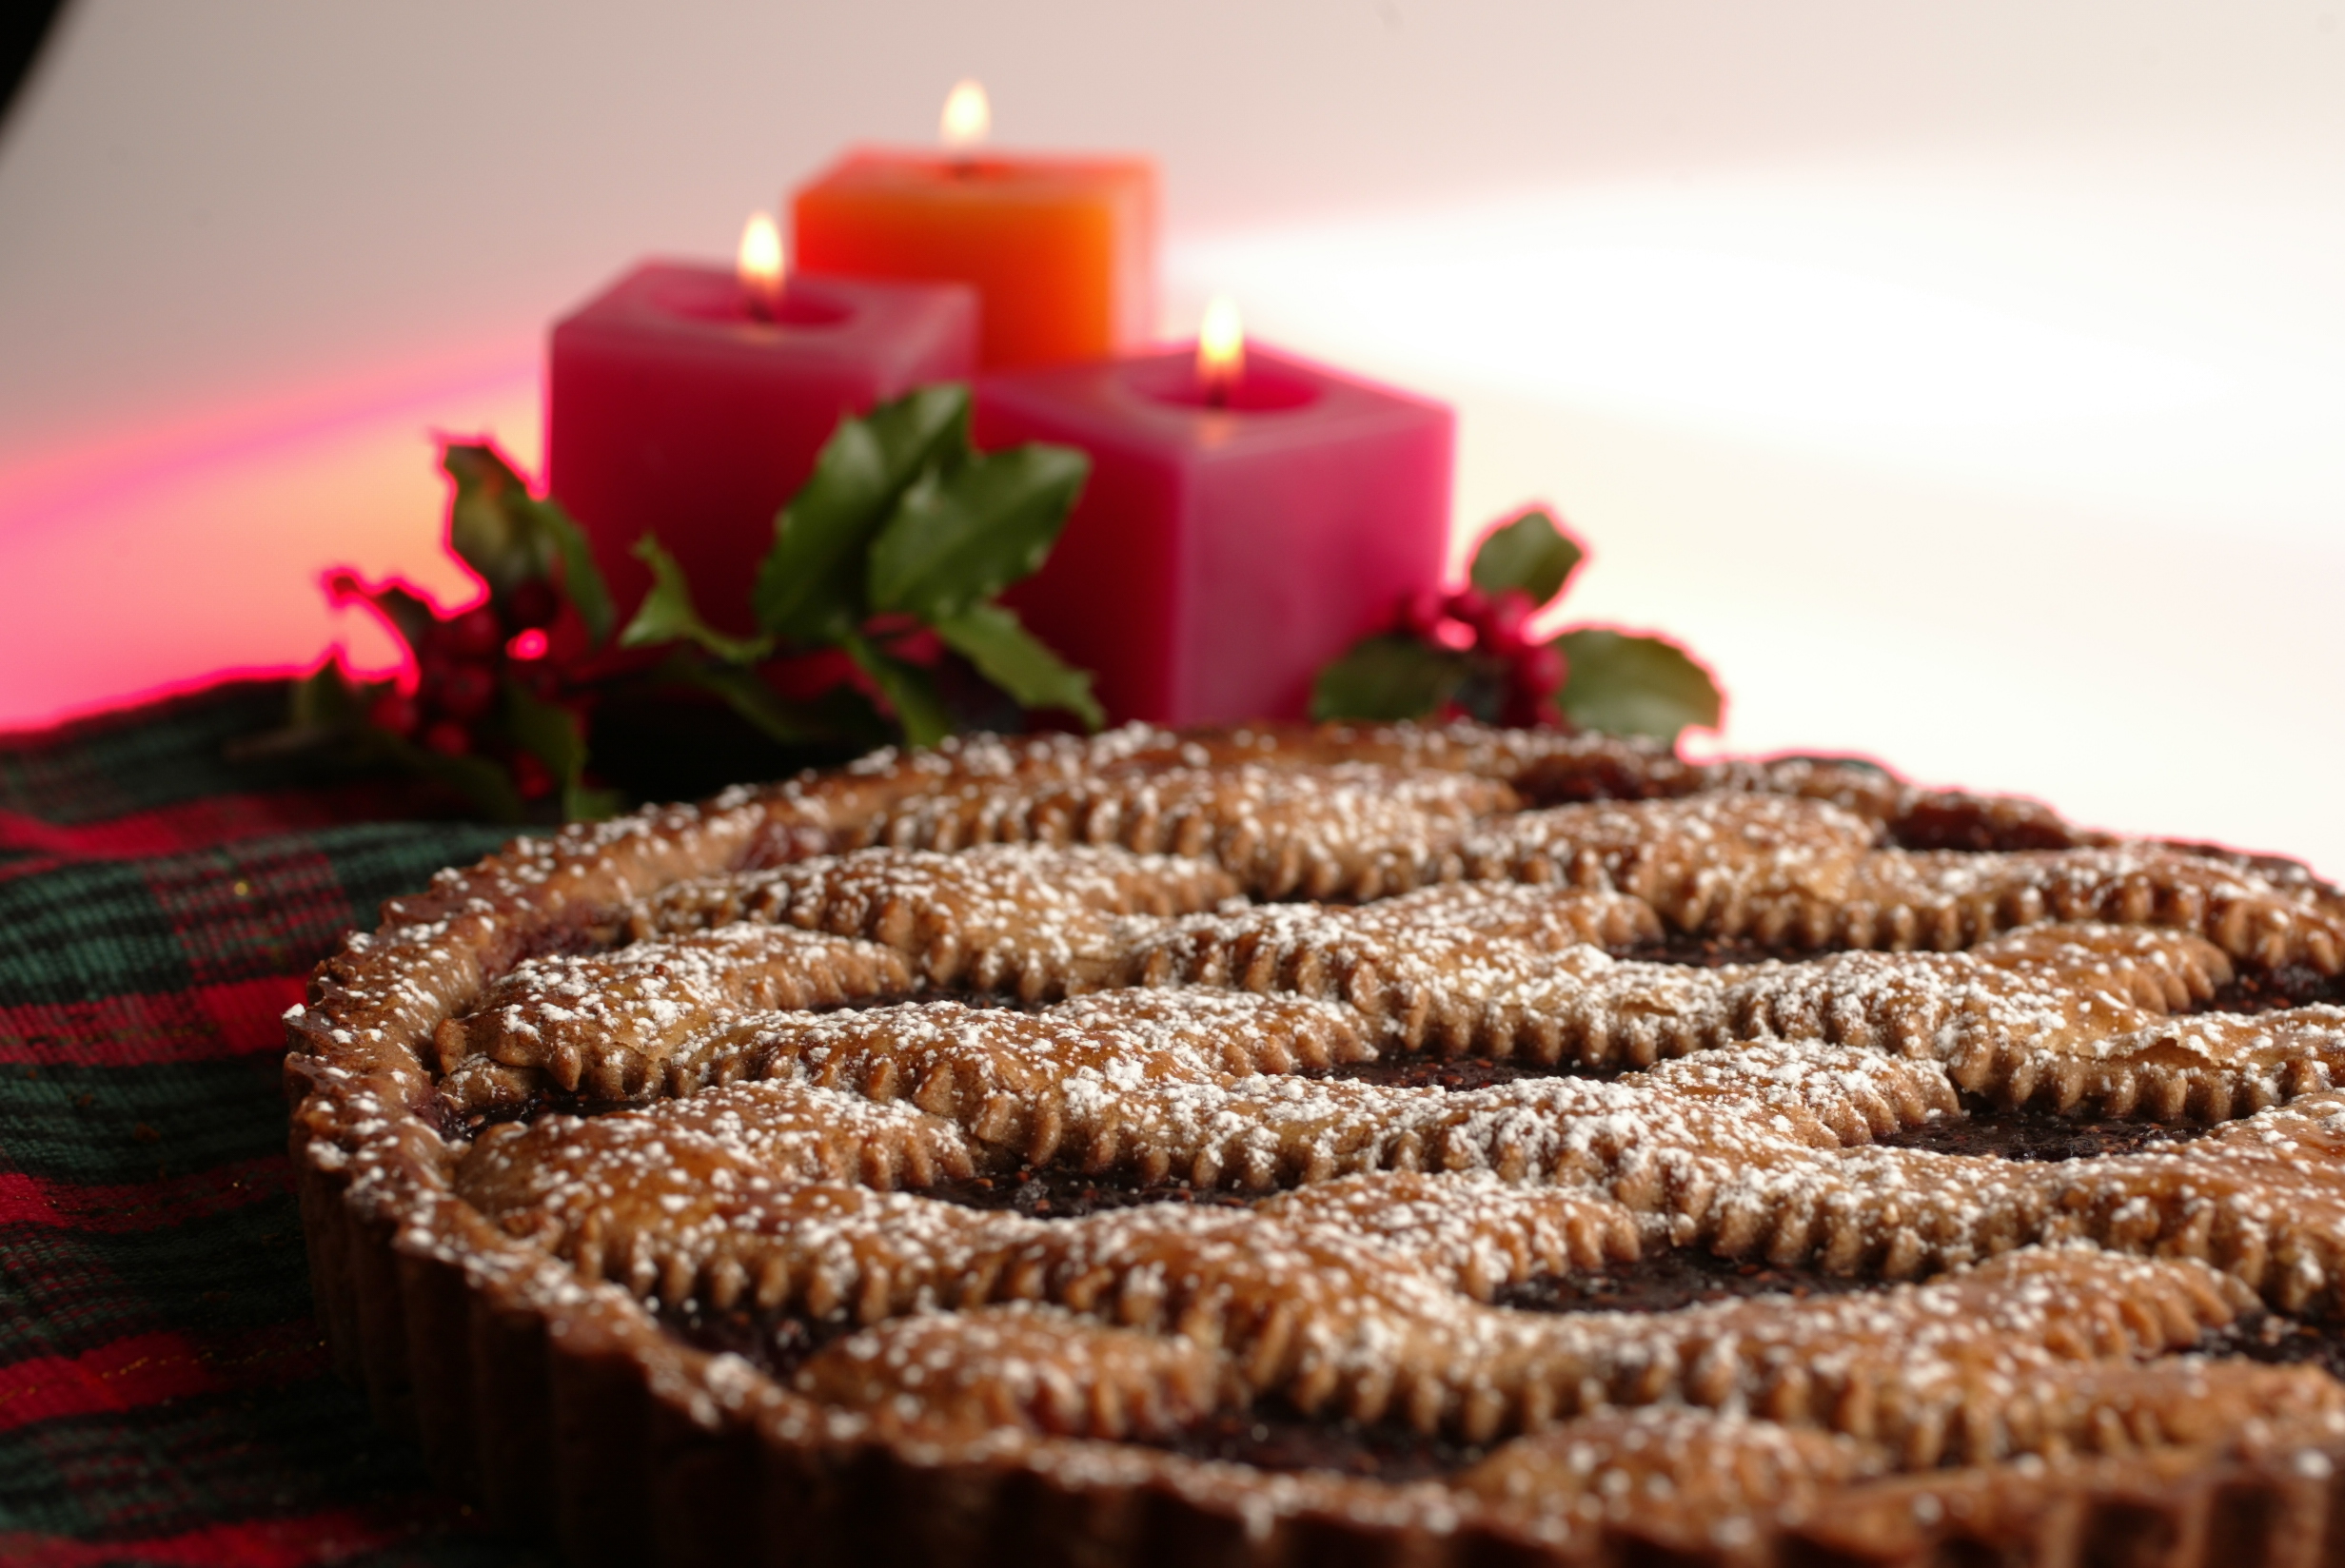 Raspberry Linzer torte with red candles and sprigs of holly